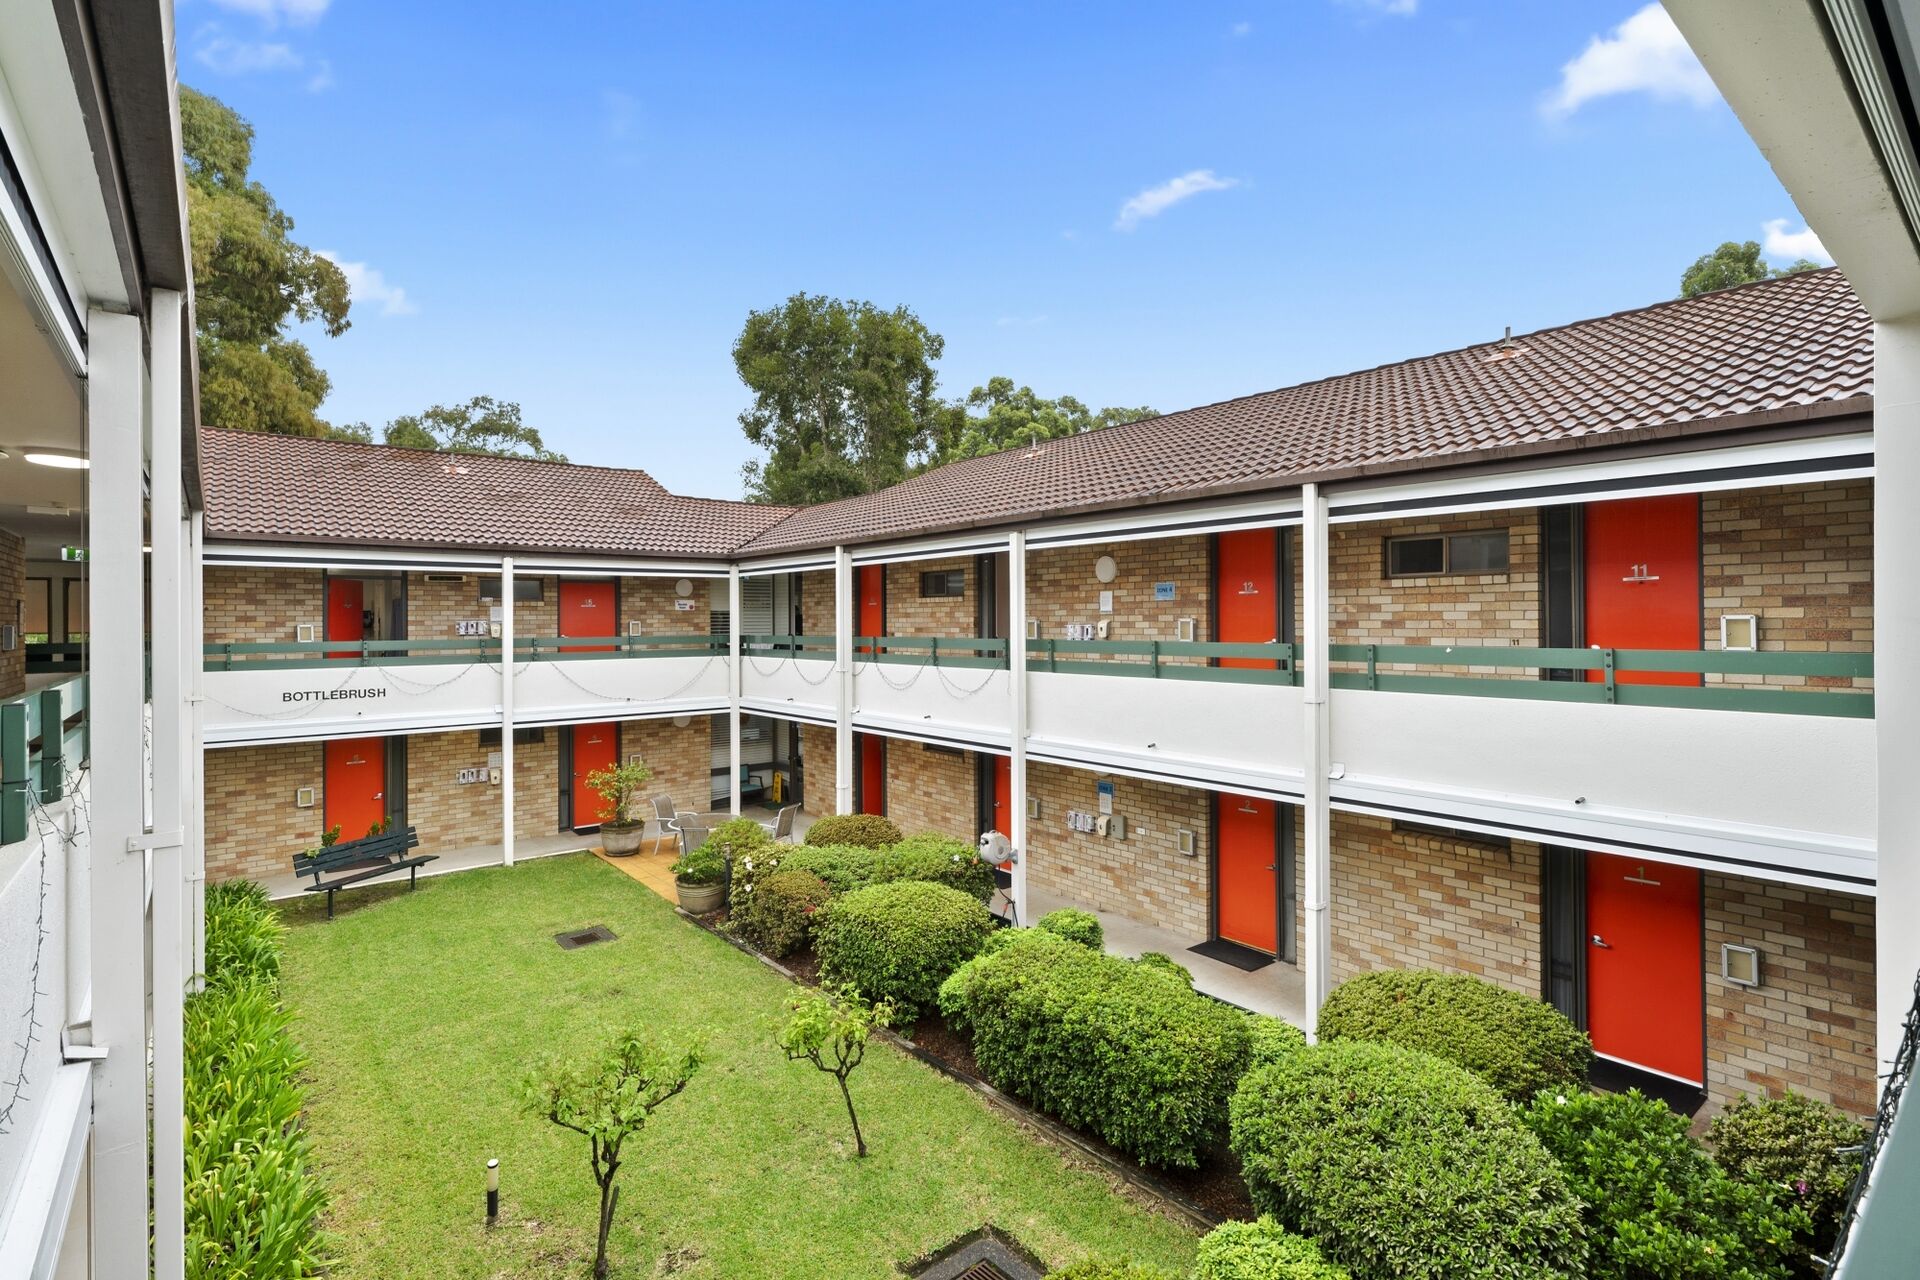 Building complex at aminya centre aged care home in baulkham hills for low care and dementia